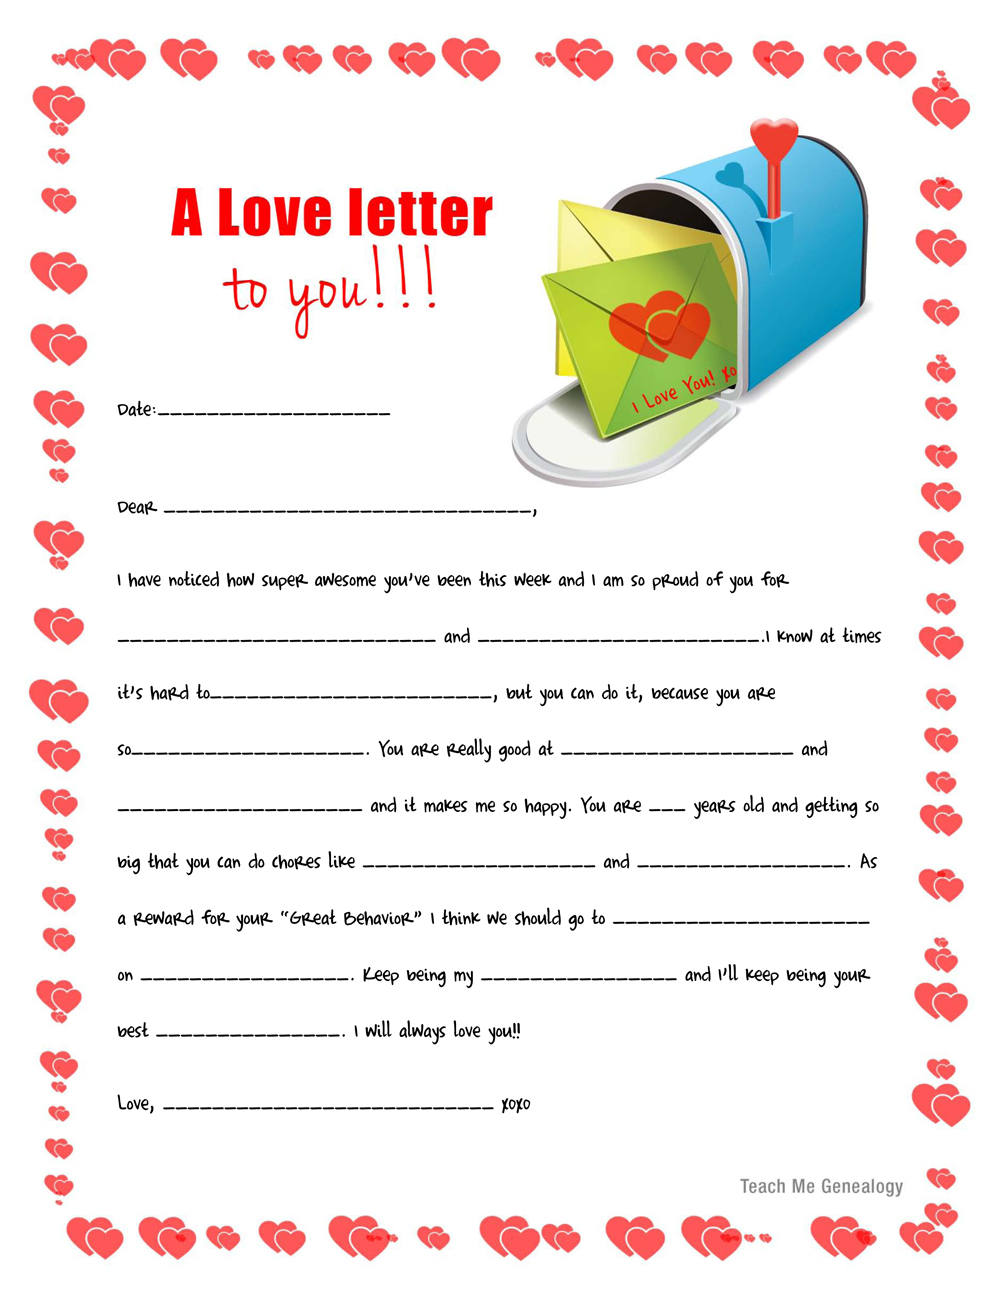 Love letter templates free